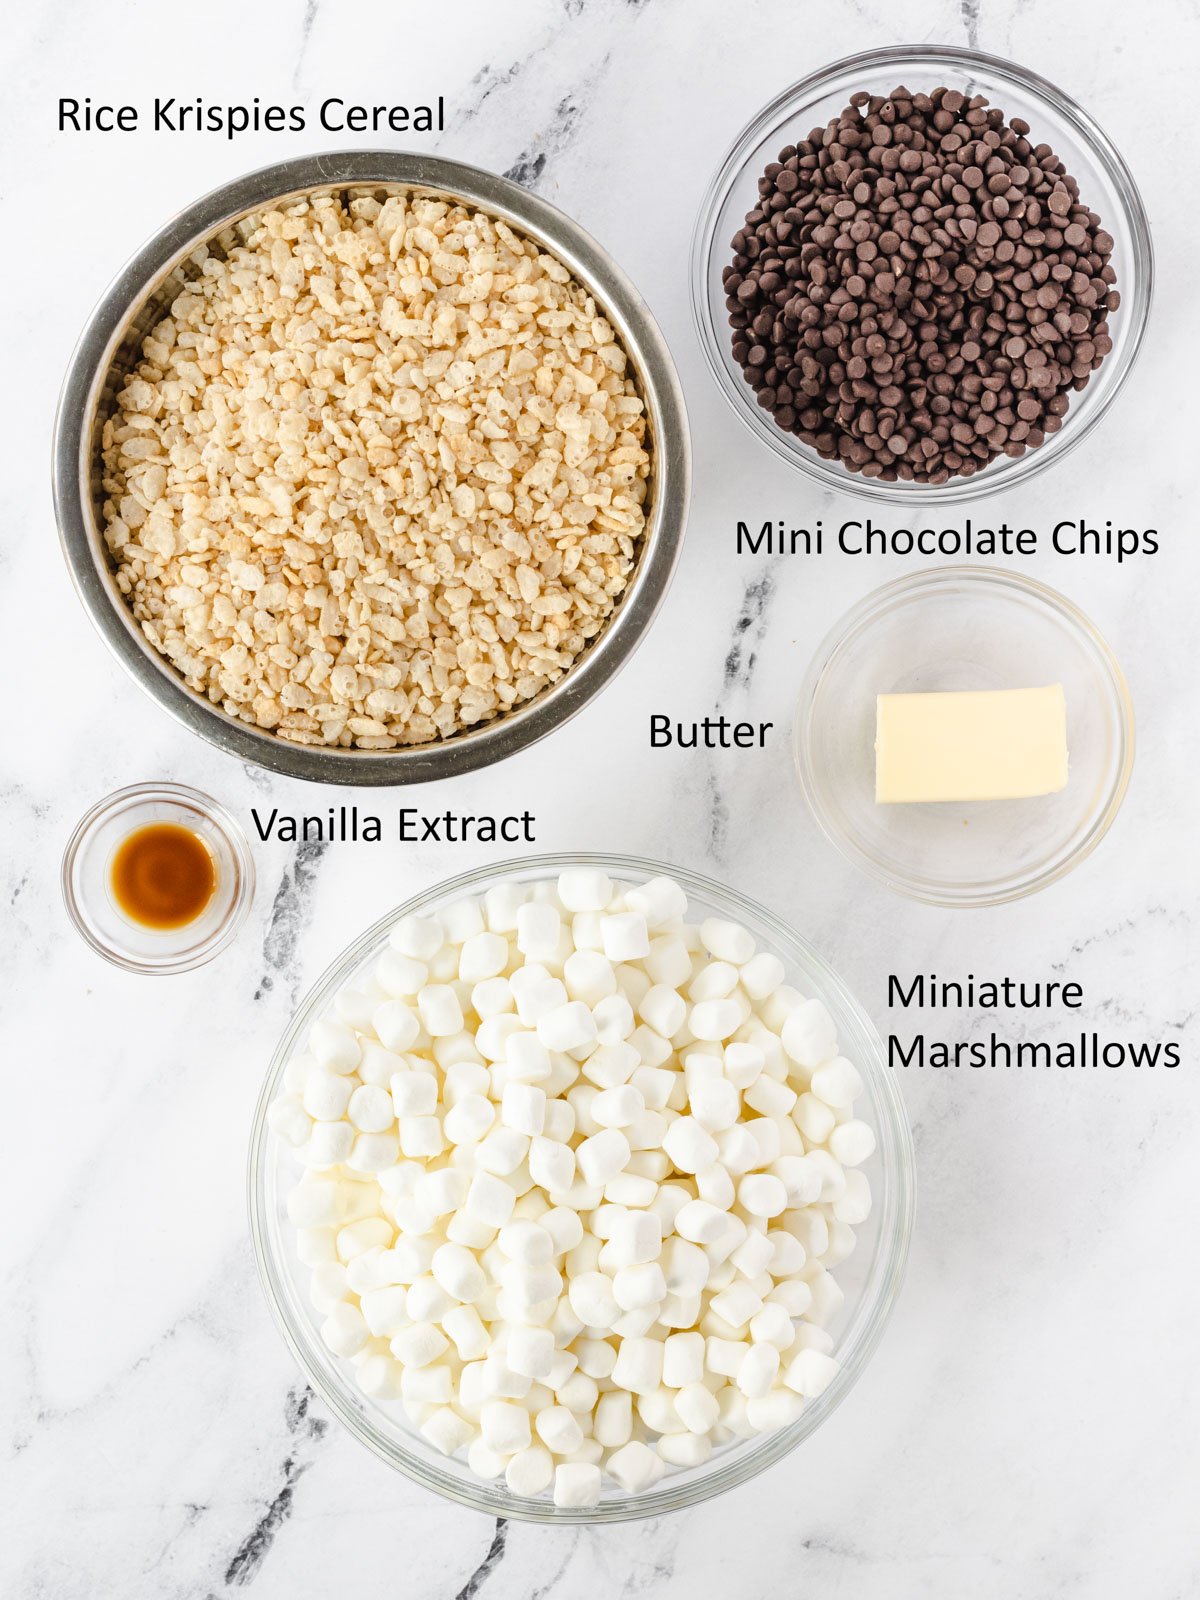 Labeled ingredients, cereal, chocolate chips, butter, marshmallows, and vanilla extract.